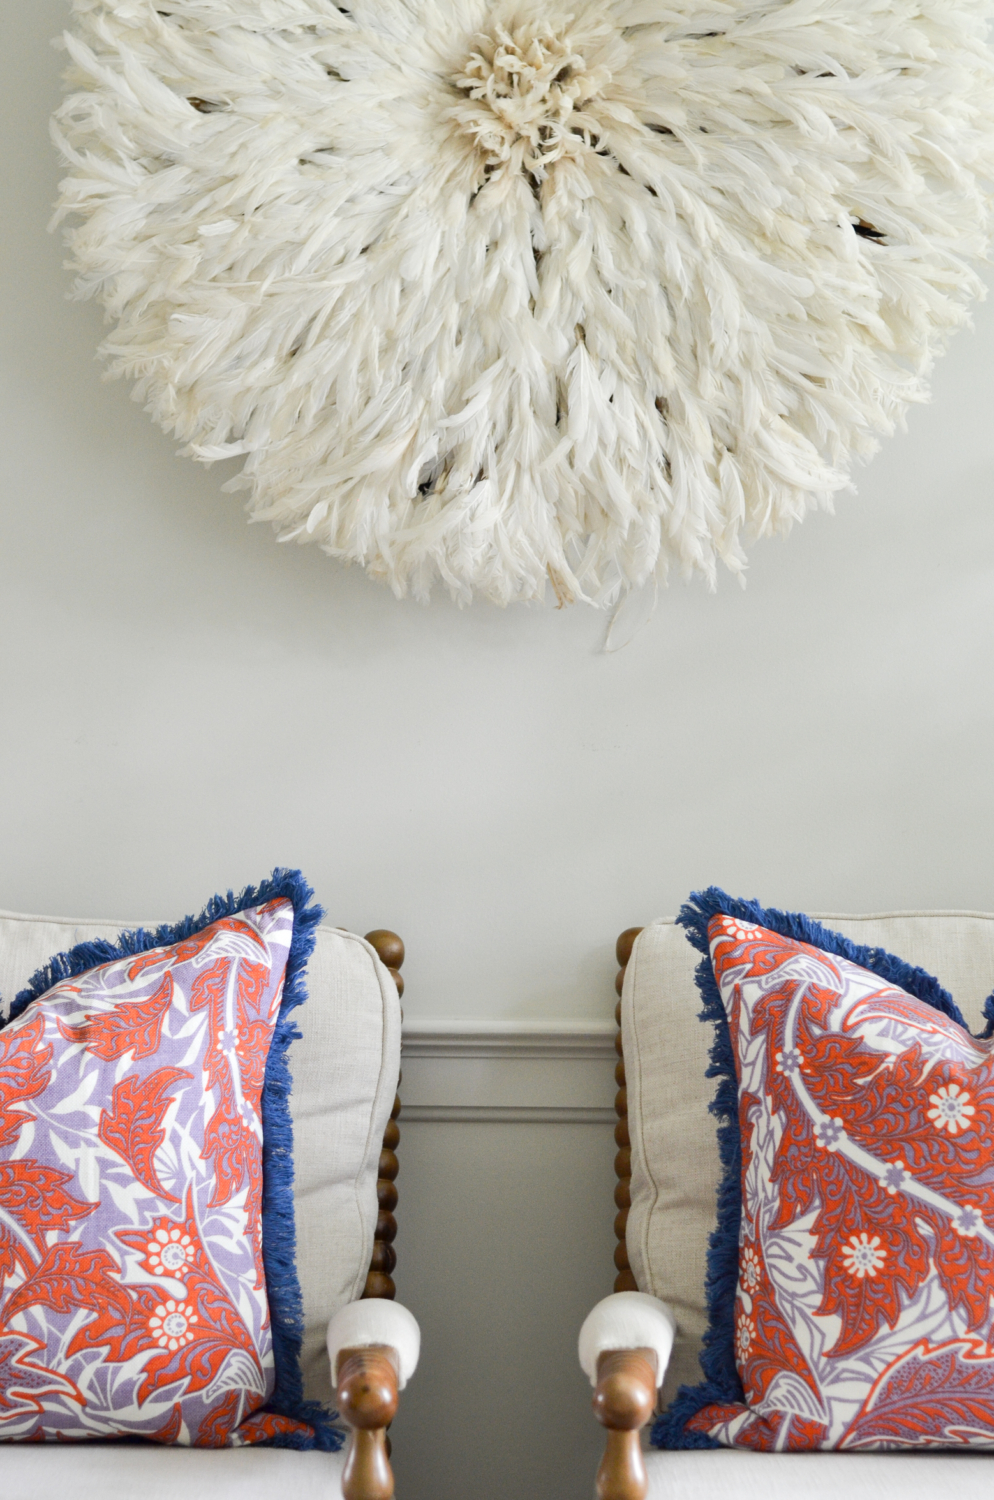 Living room with a neutral base, gold, navy blue, coral. Juju hat feather wall hanging is a striking centerpiece.